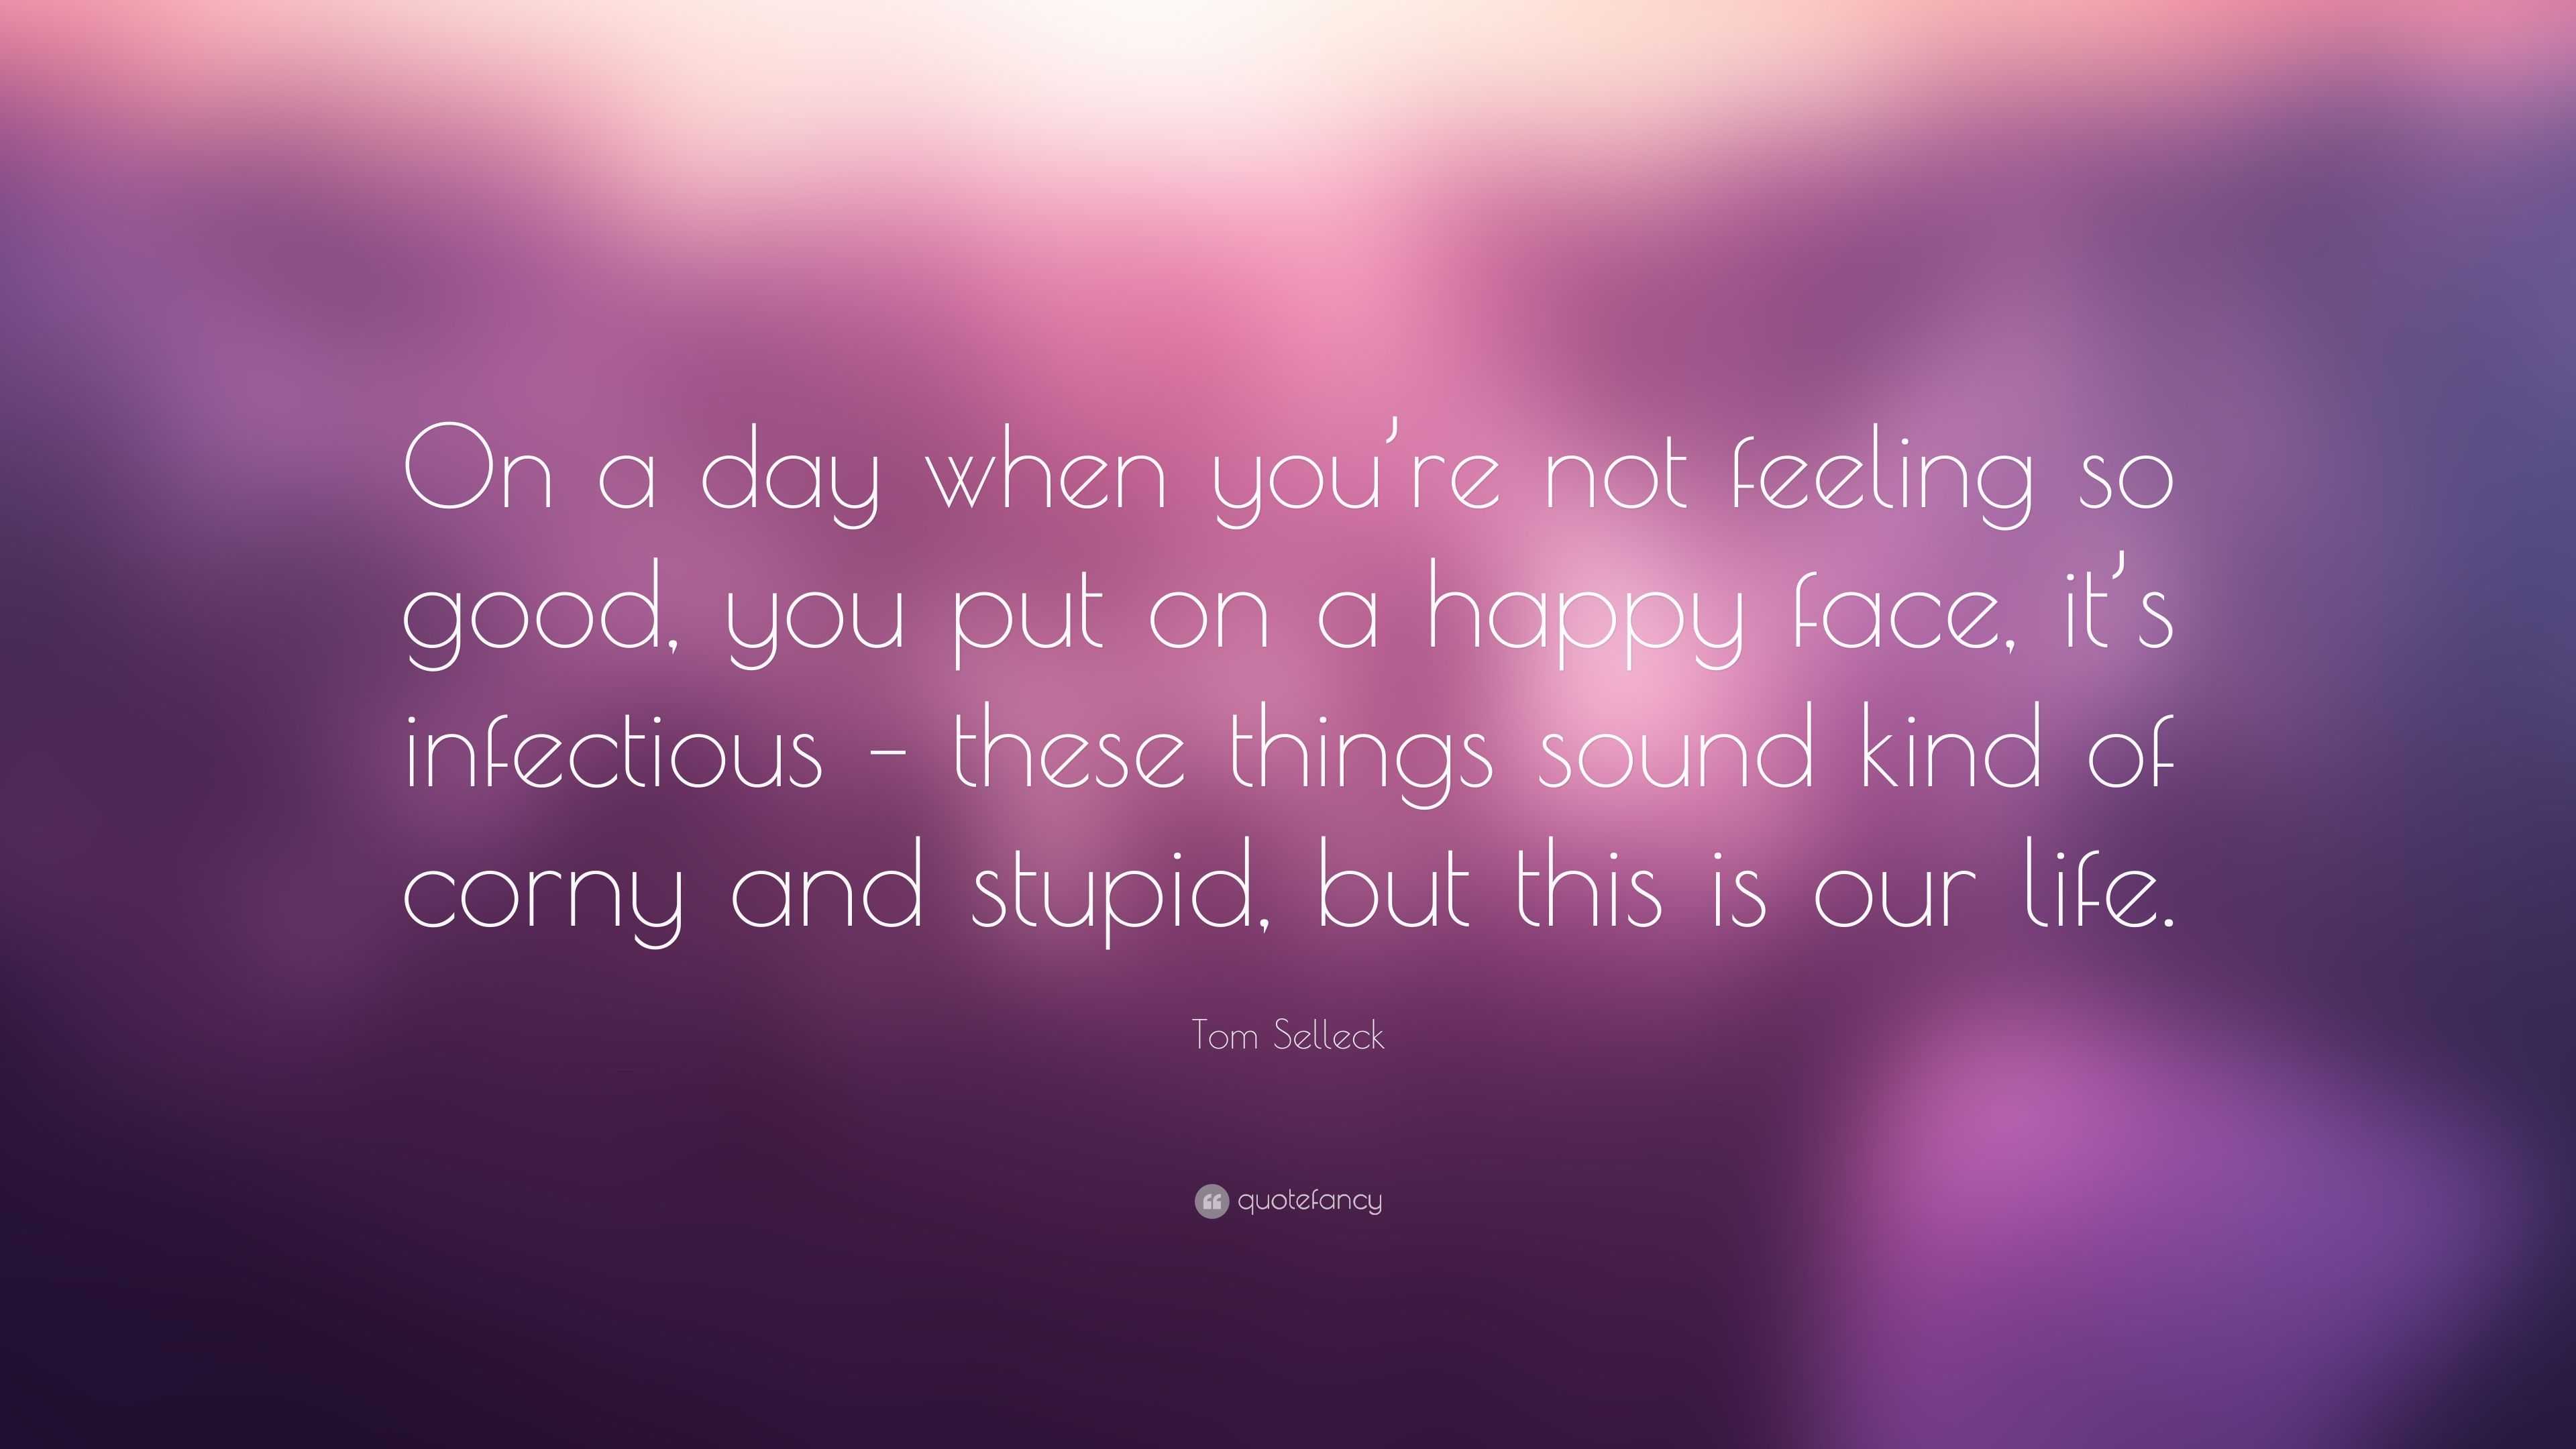 Tom Selleck Quote: “On a day when you’re not feeling so good, you put ...